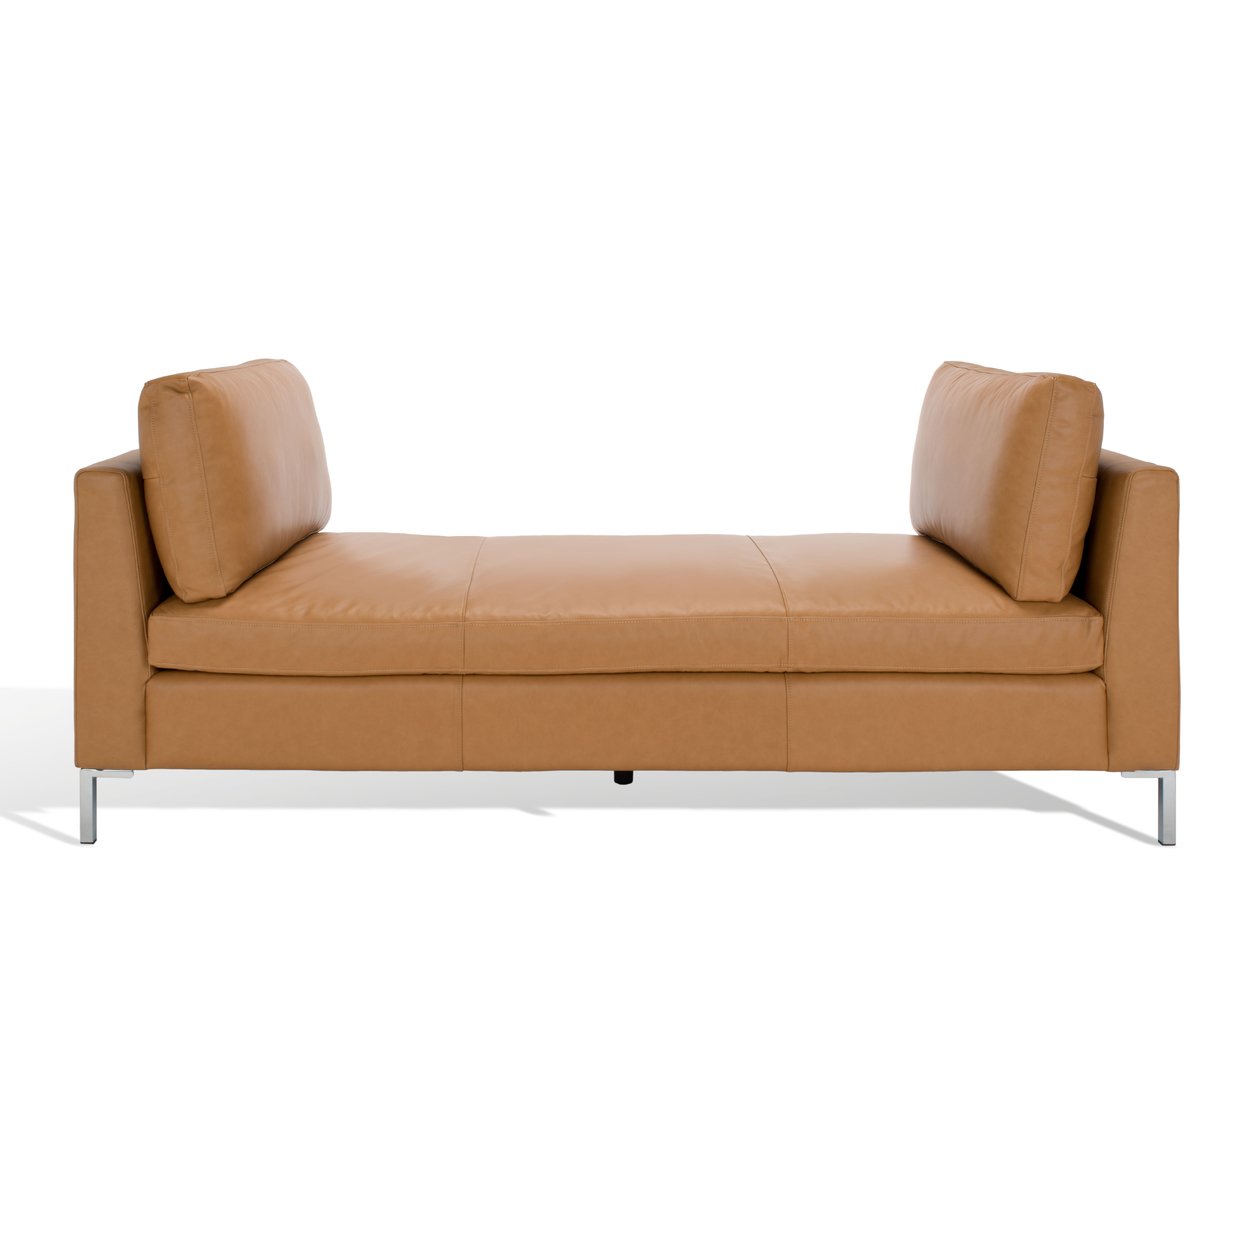 SAFAVIEH COUTURE Tatianna Leather Bench Light Brown